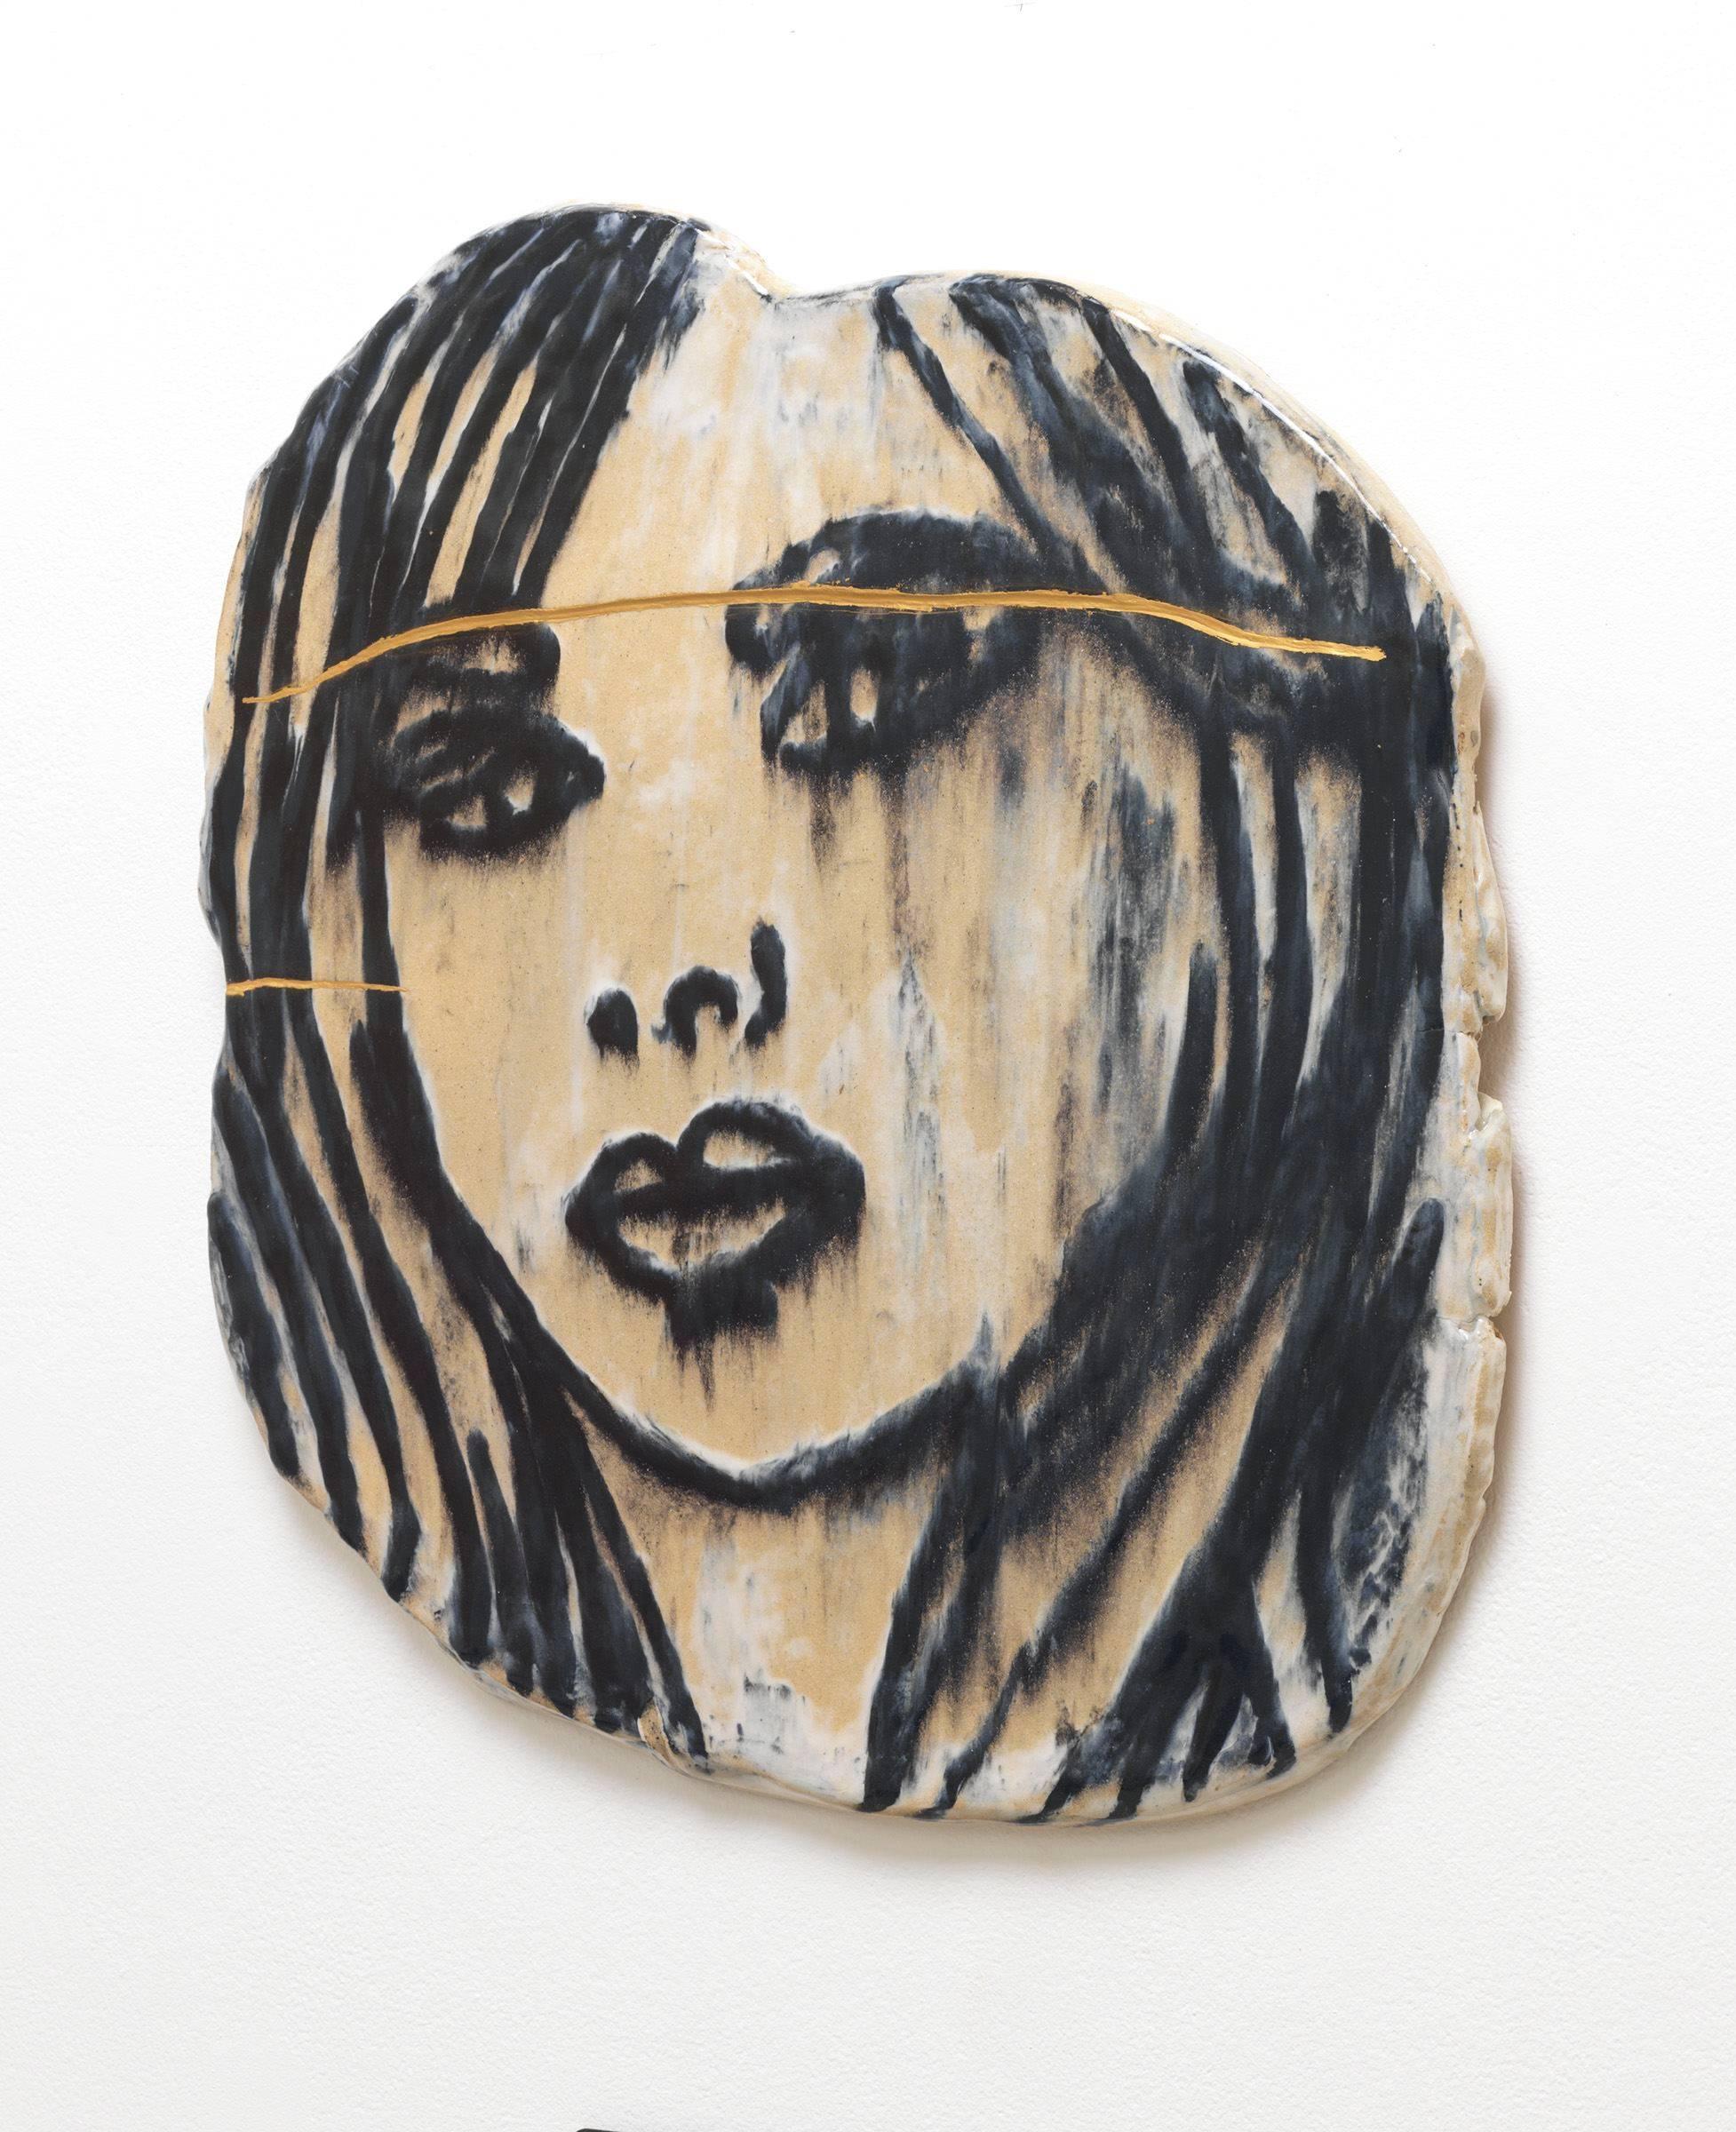 Portrait with Wounds  - Sculpture by Ghada Amer